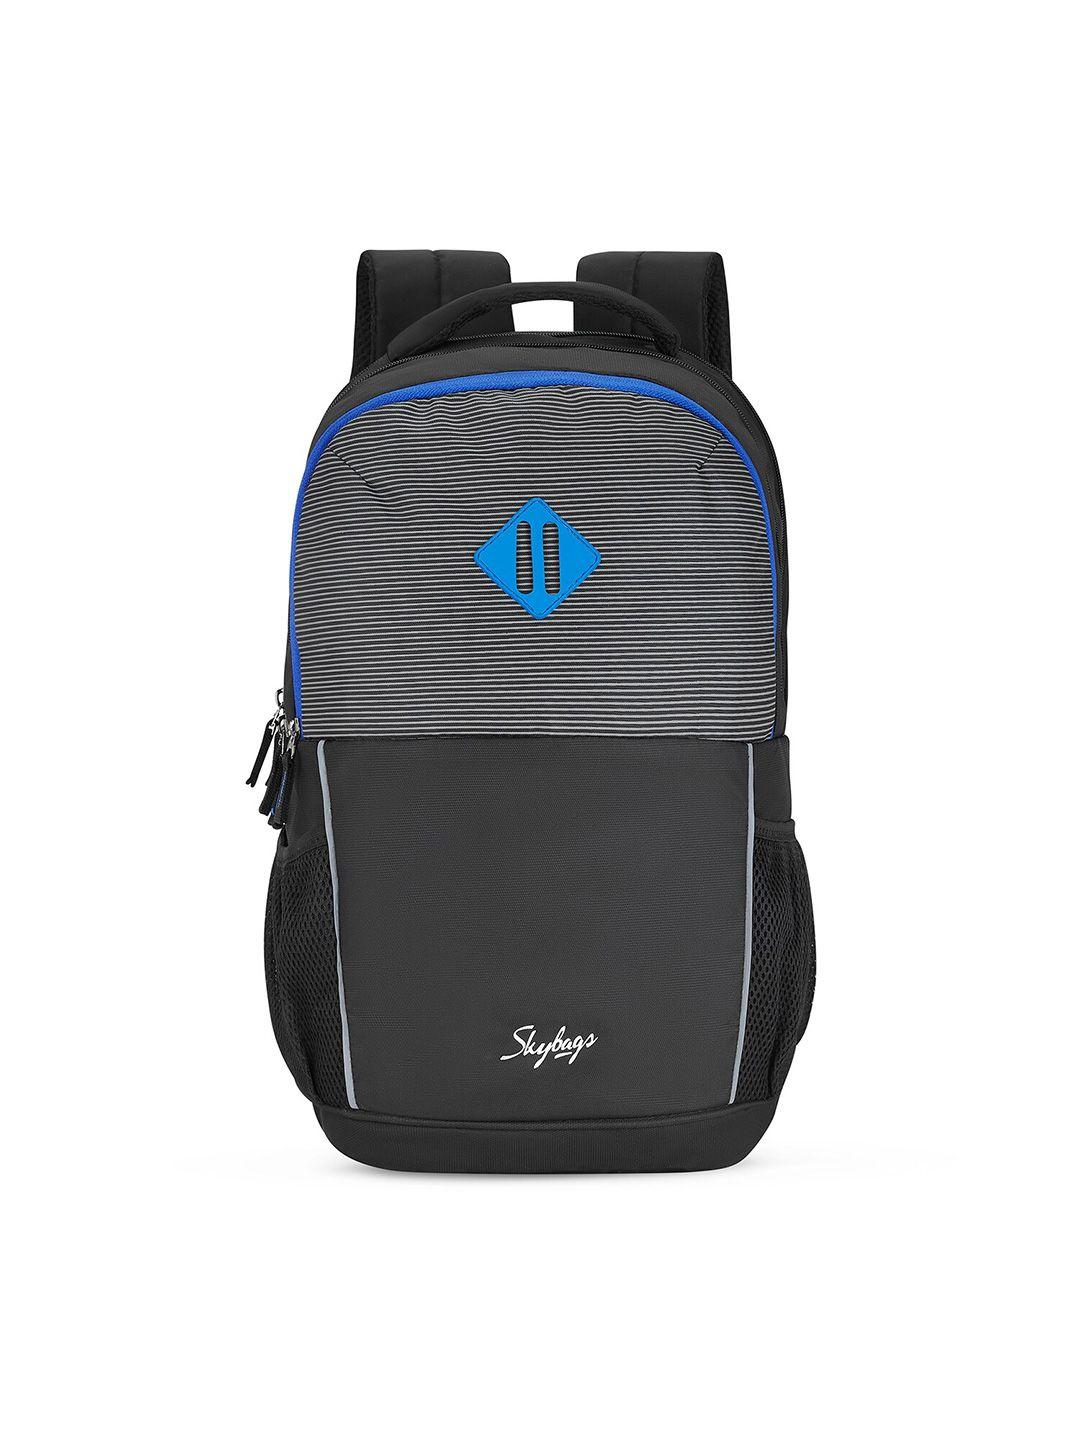 skybags striped backpack with a laptop compartment